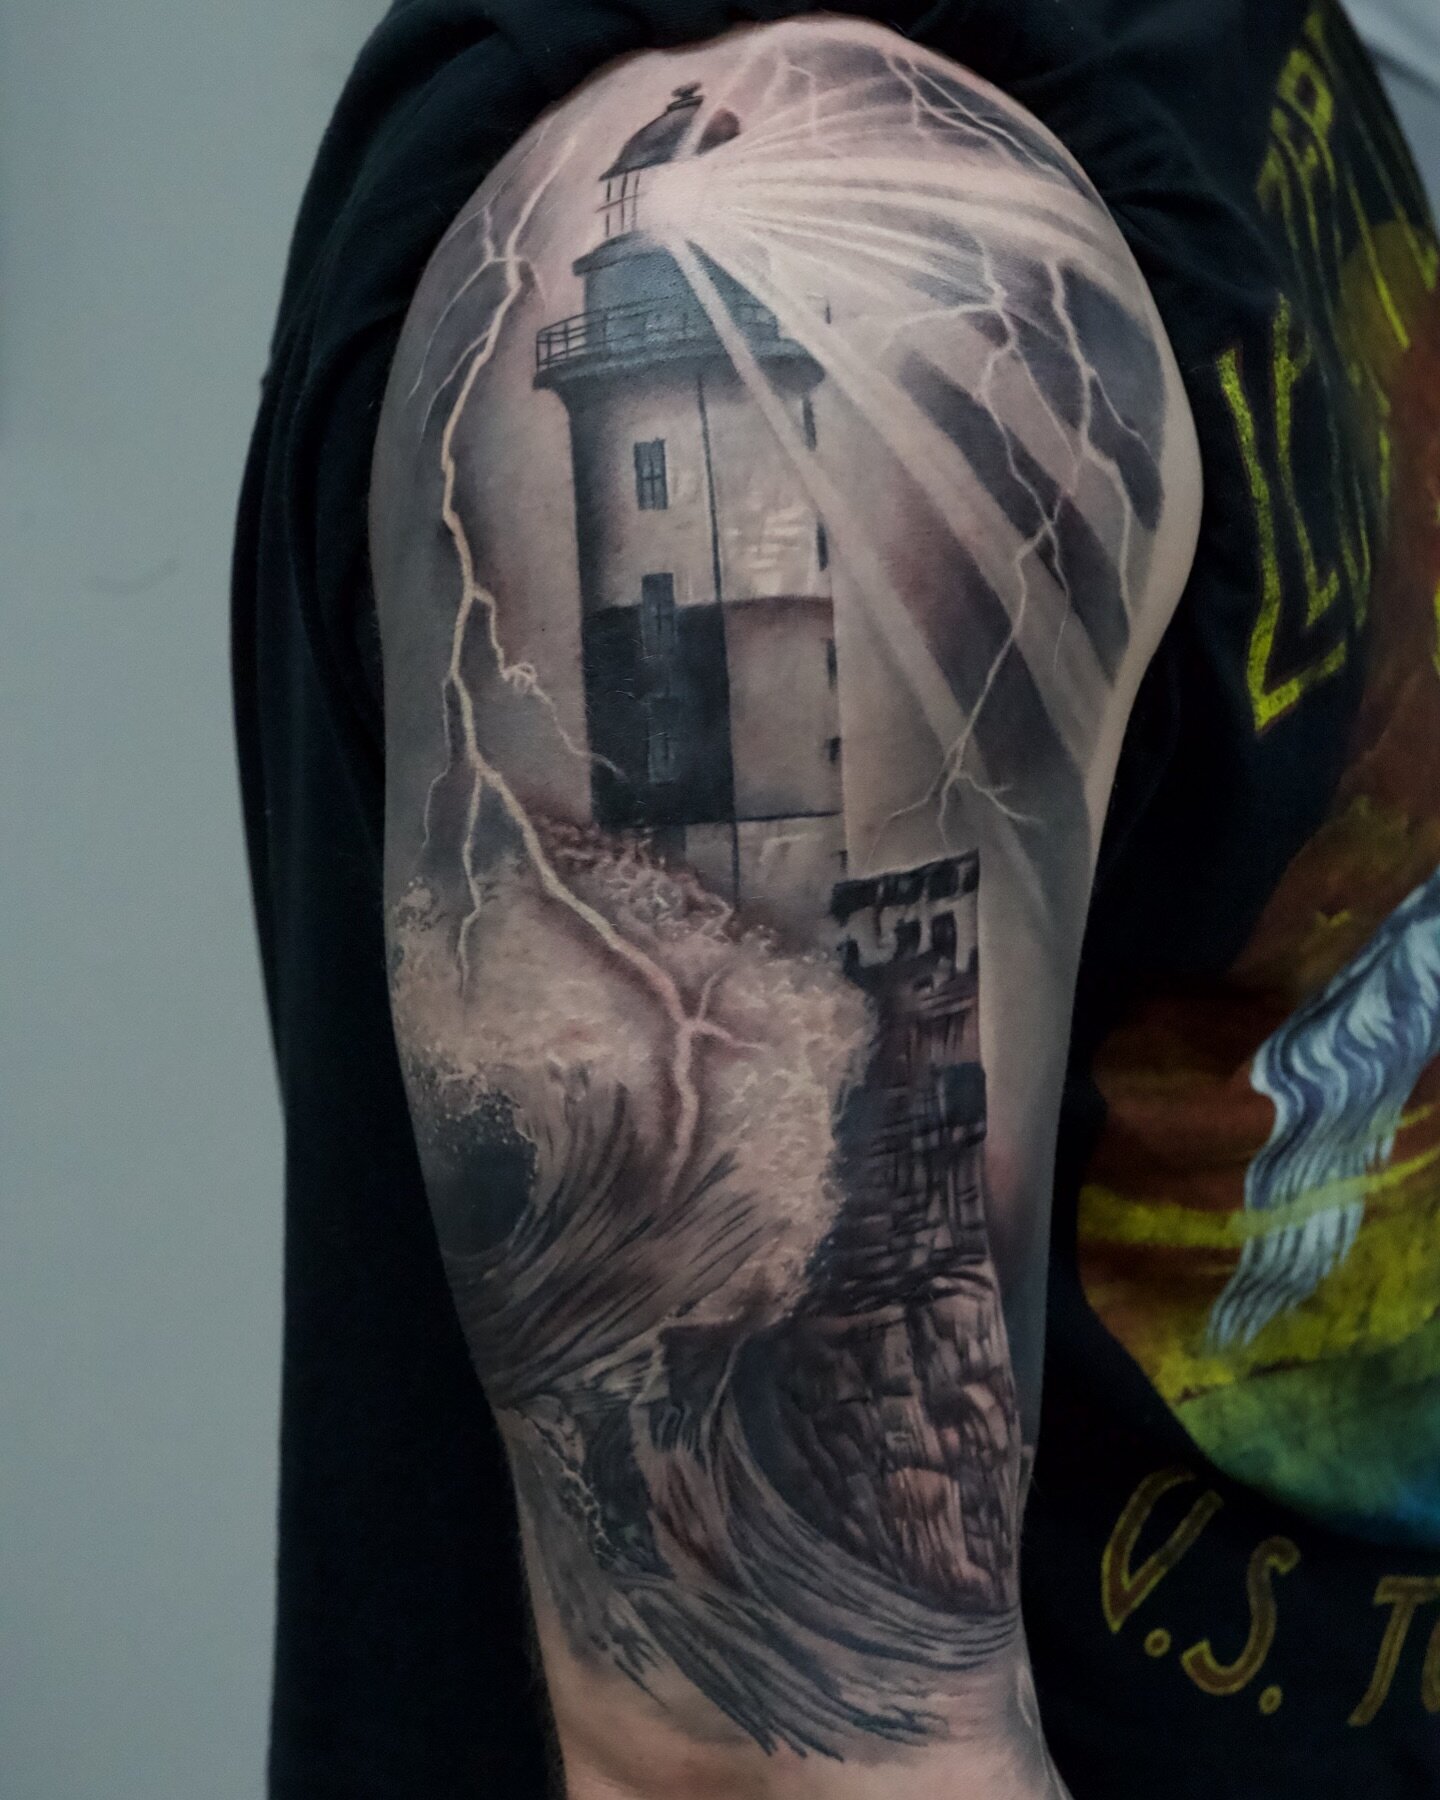 Look at the detail on this Lighthouse tattoo! 😮&zwj;💨
Crafted by @brandedredart_backup 
*we&rsquo;ve been a little behind on getting back to our tattoo inquiries for Brandon although the next few days are dedicated to that &amp; you should all hear